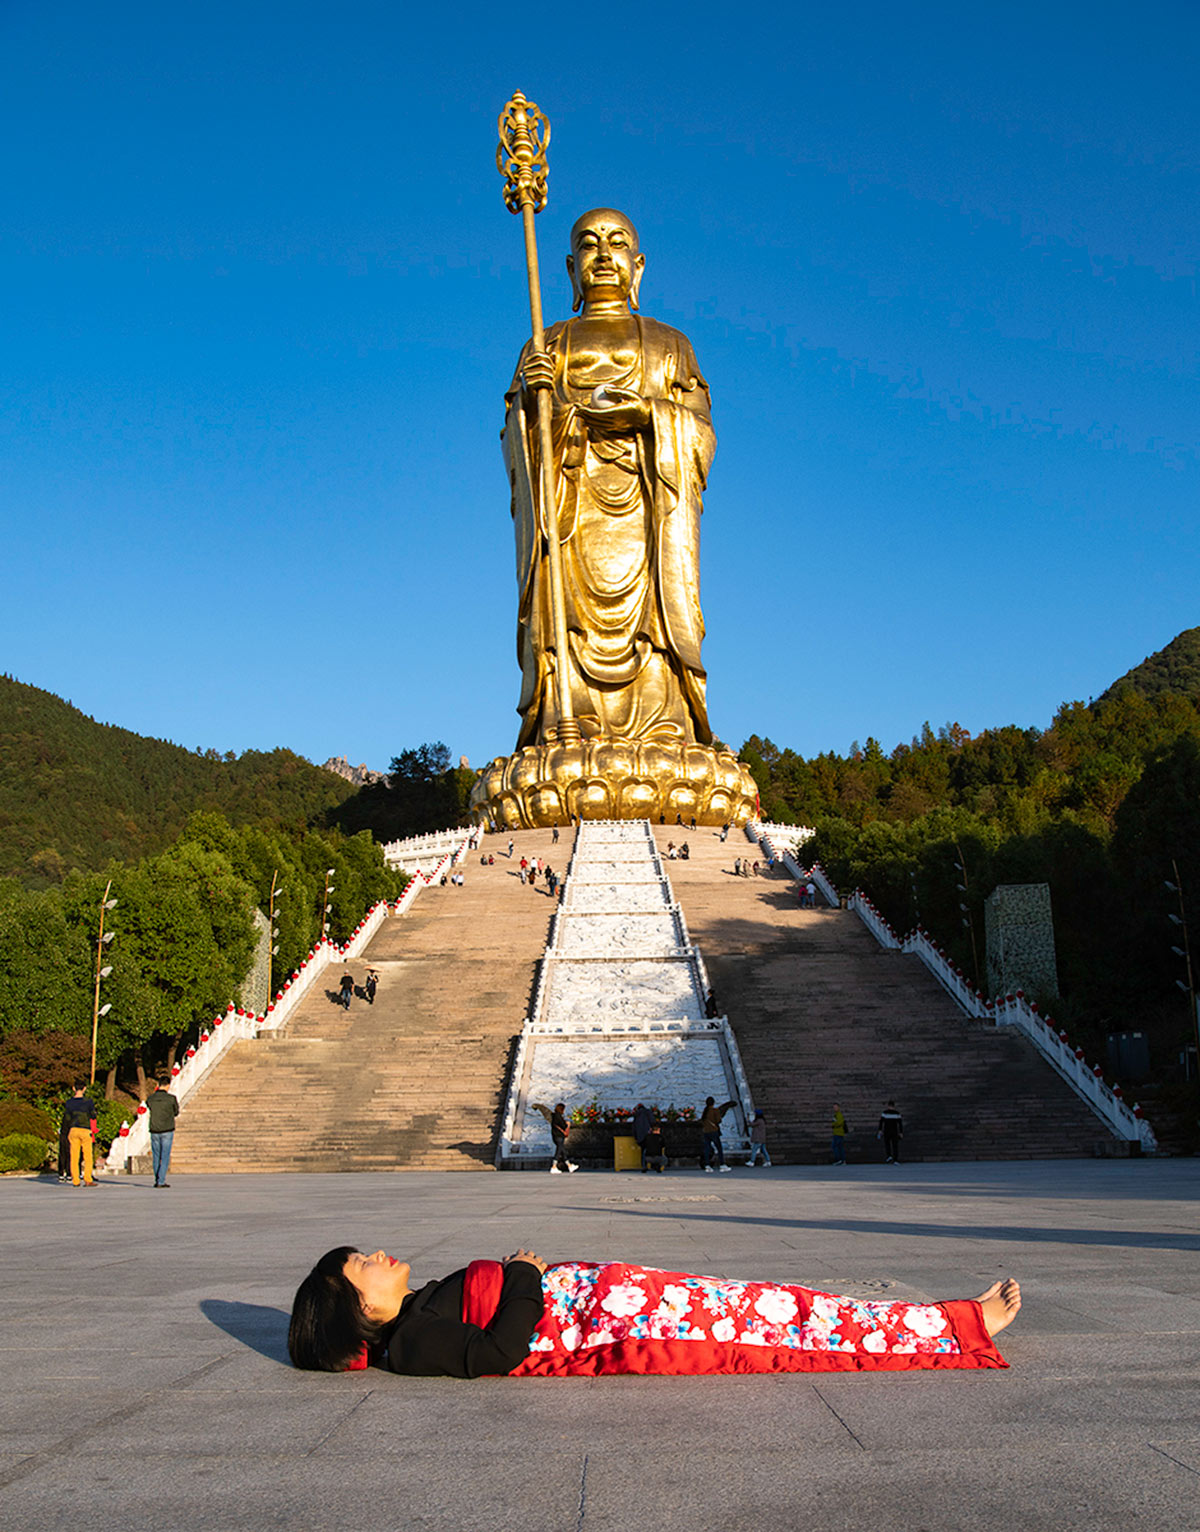 Chun Hua Catherine Dong celebrates her death and sleeps in front of a big gold Buddha in Mountain JiuHua, China